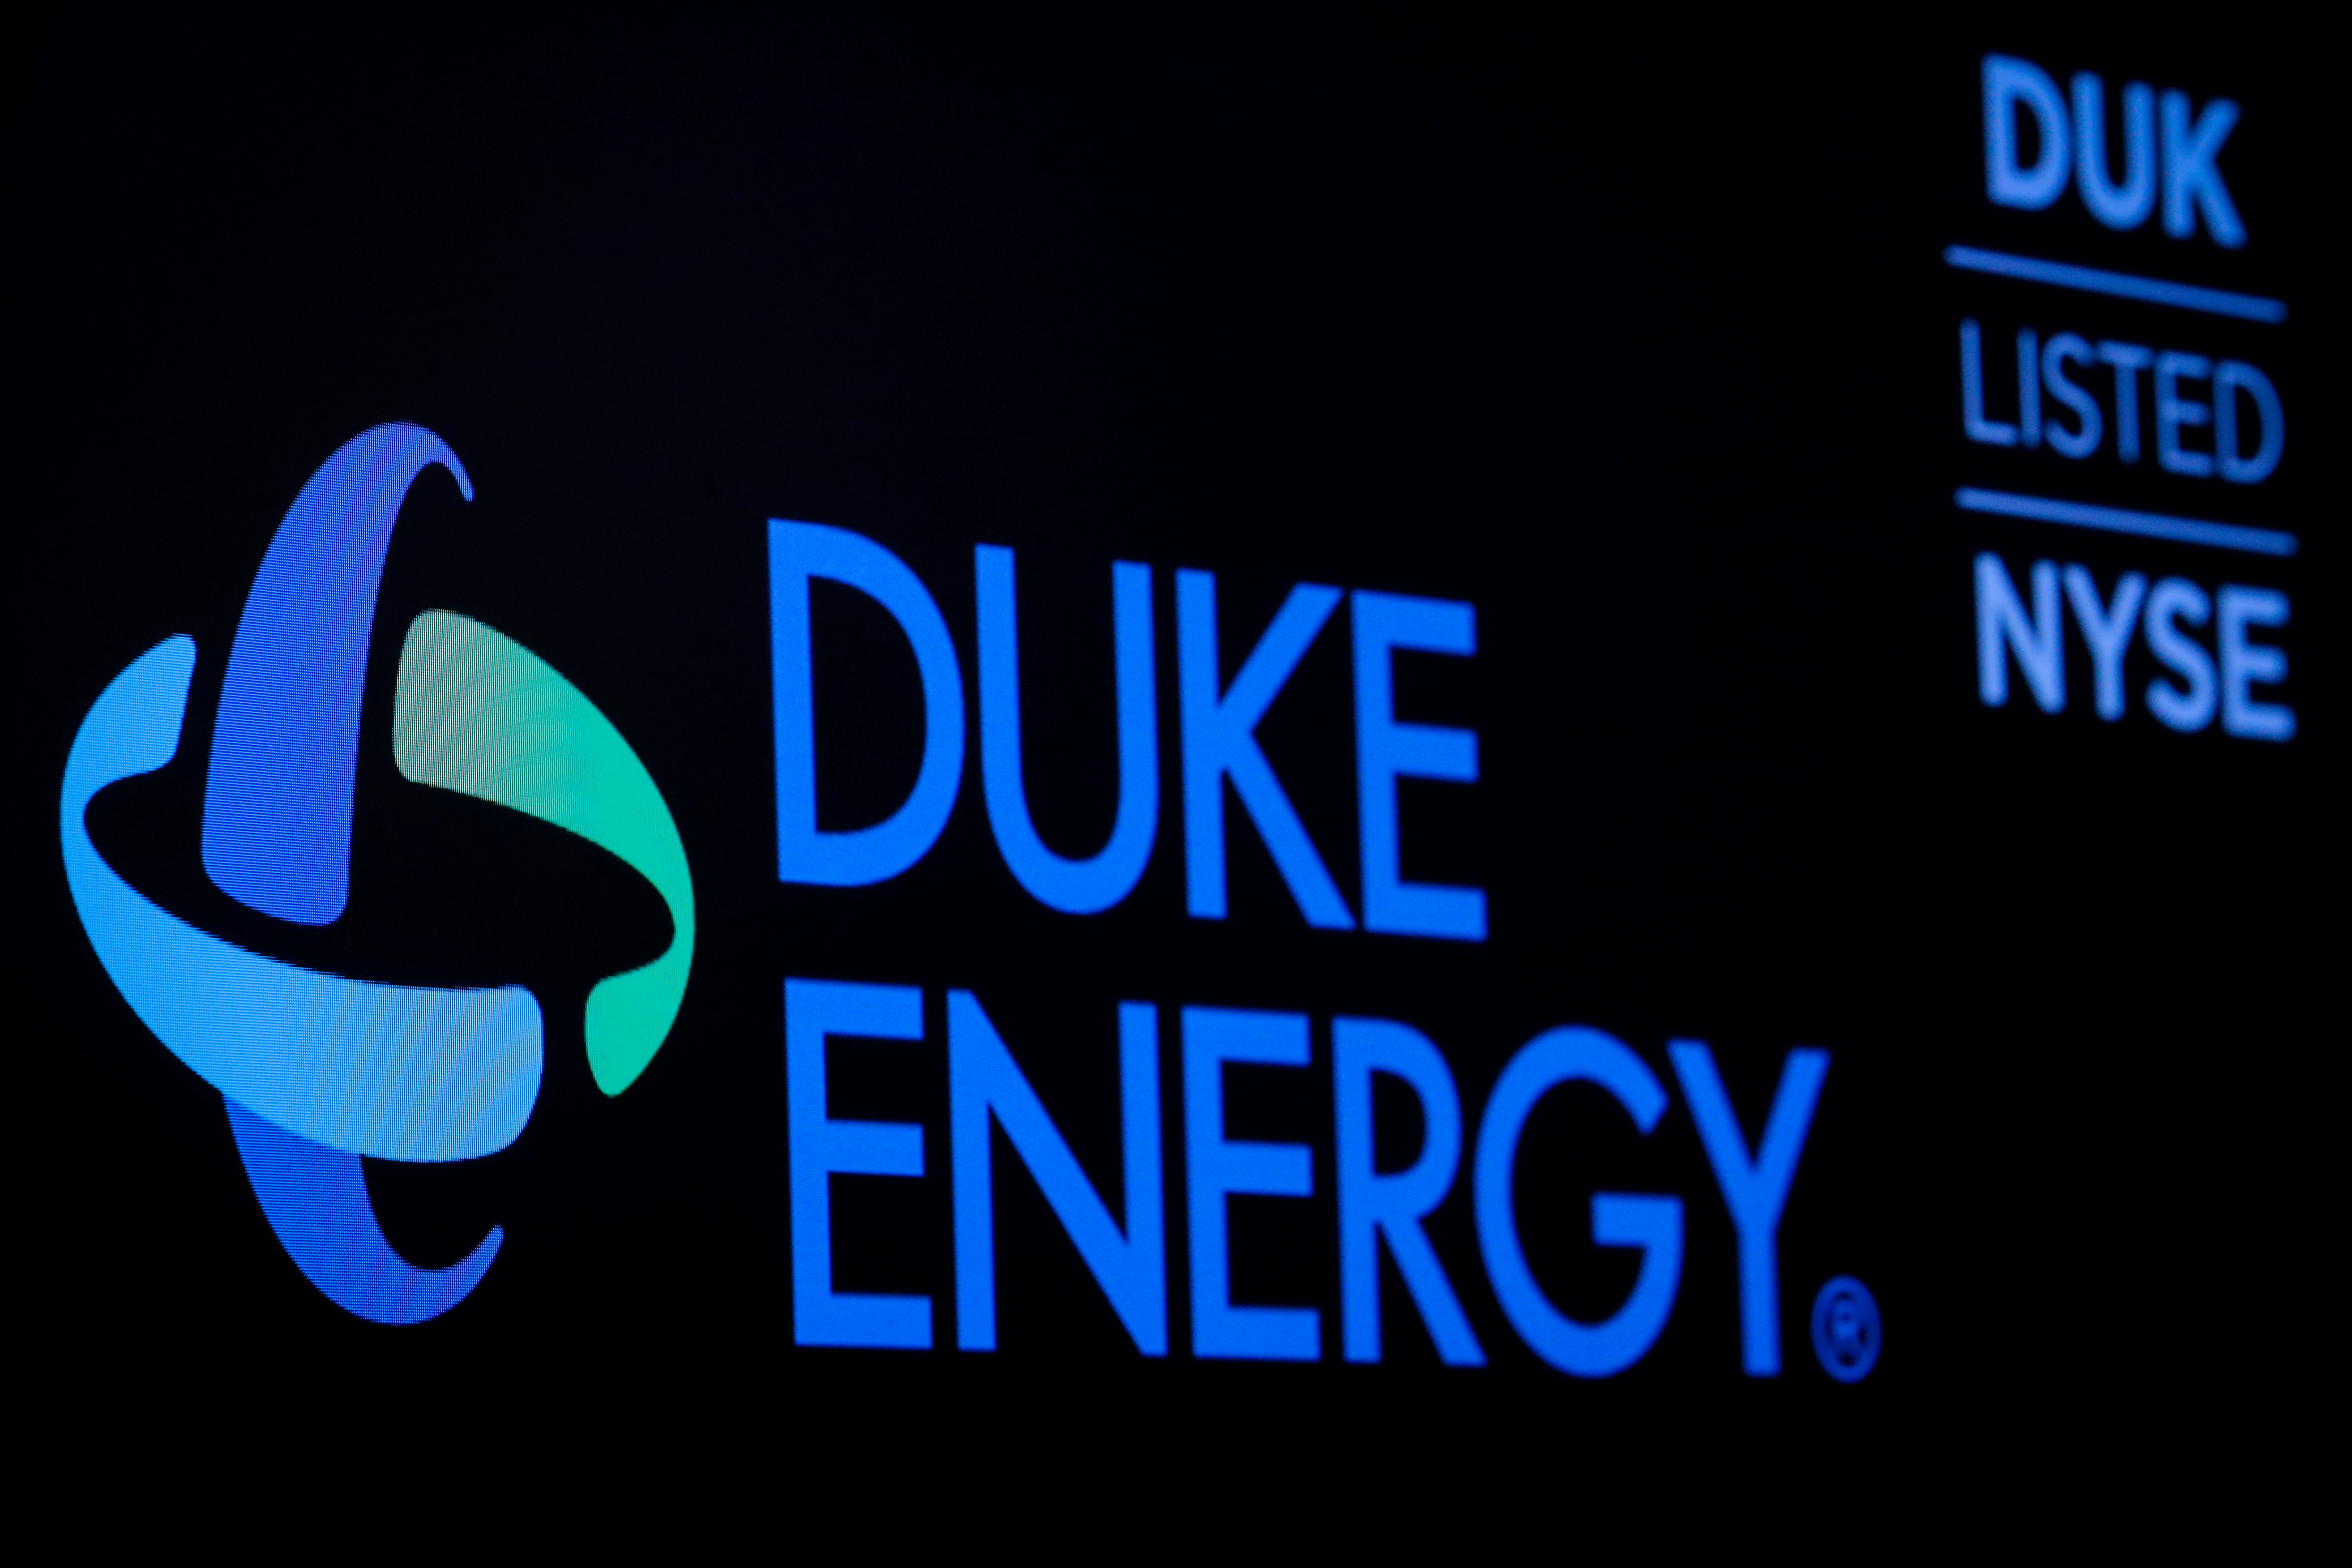 The company logo and ticker for Duke Energy Corp. is displayed on a screen on the floor of the NYSE in New York